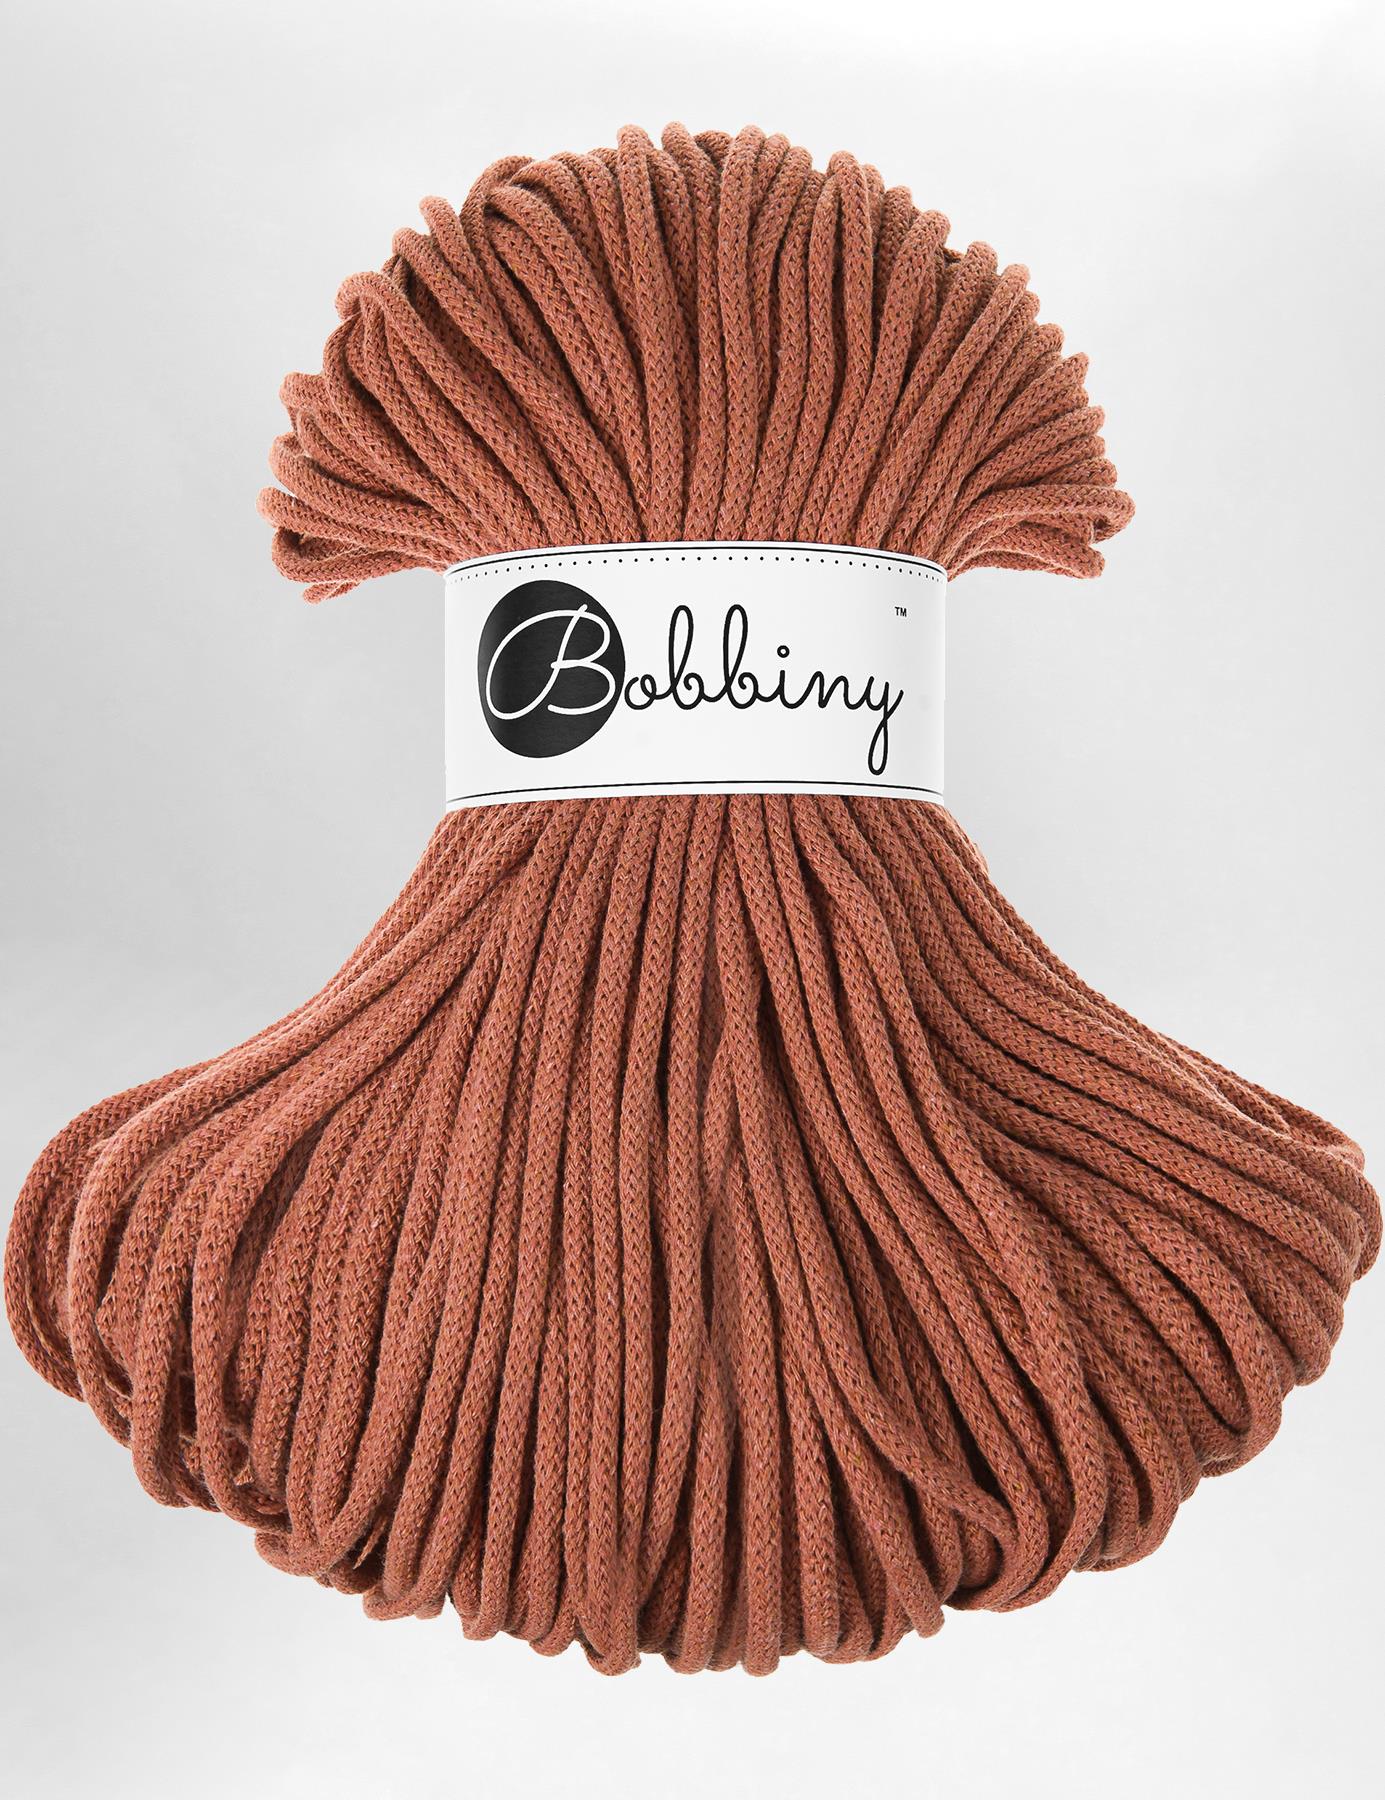 5mm Terracotta recycled cotton macrame cord by Bobbiny (100m)